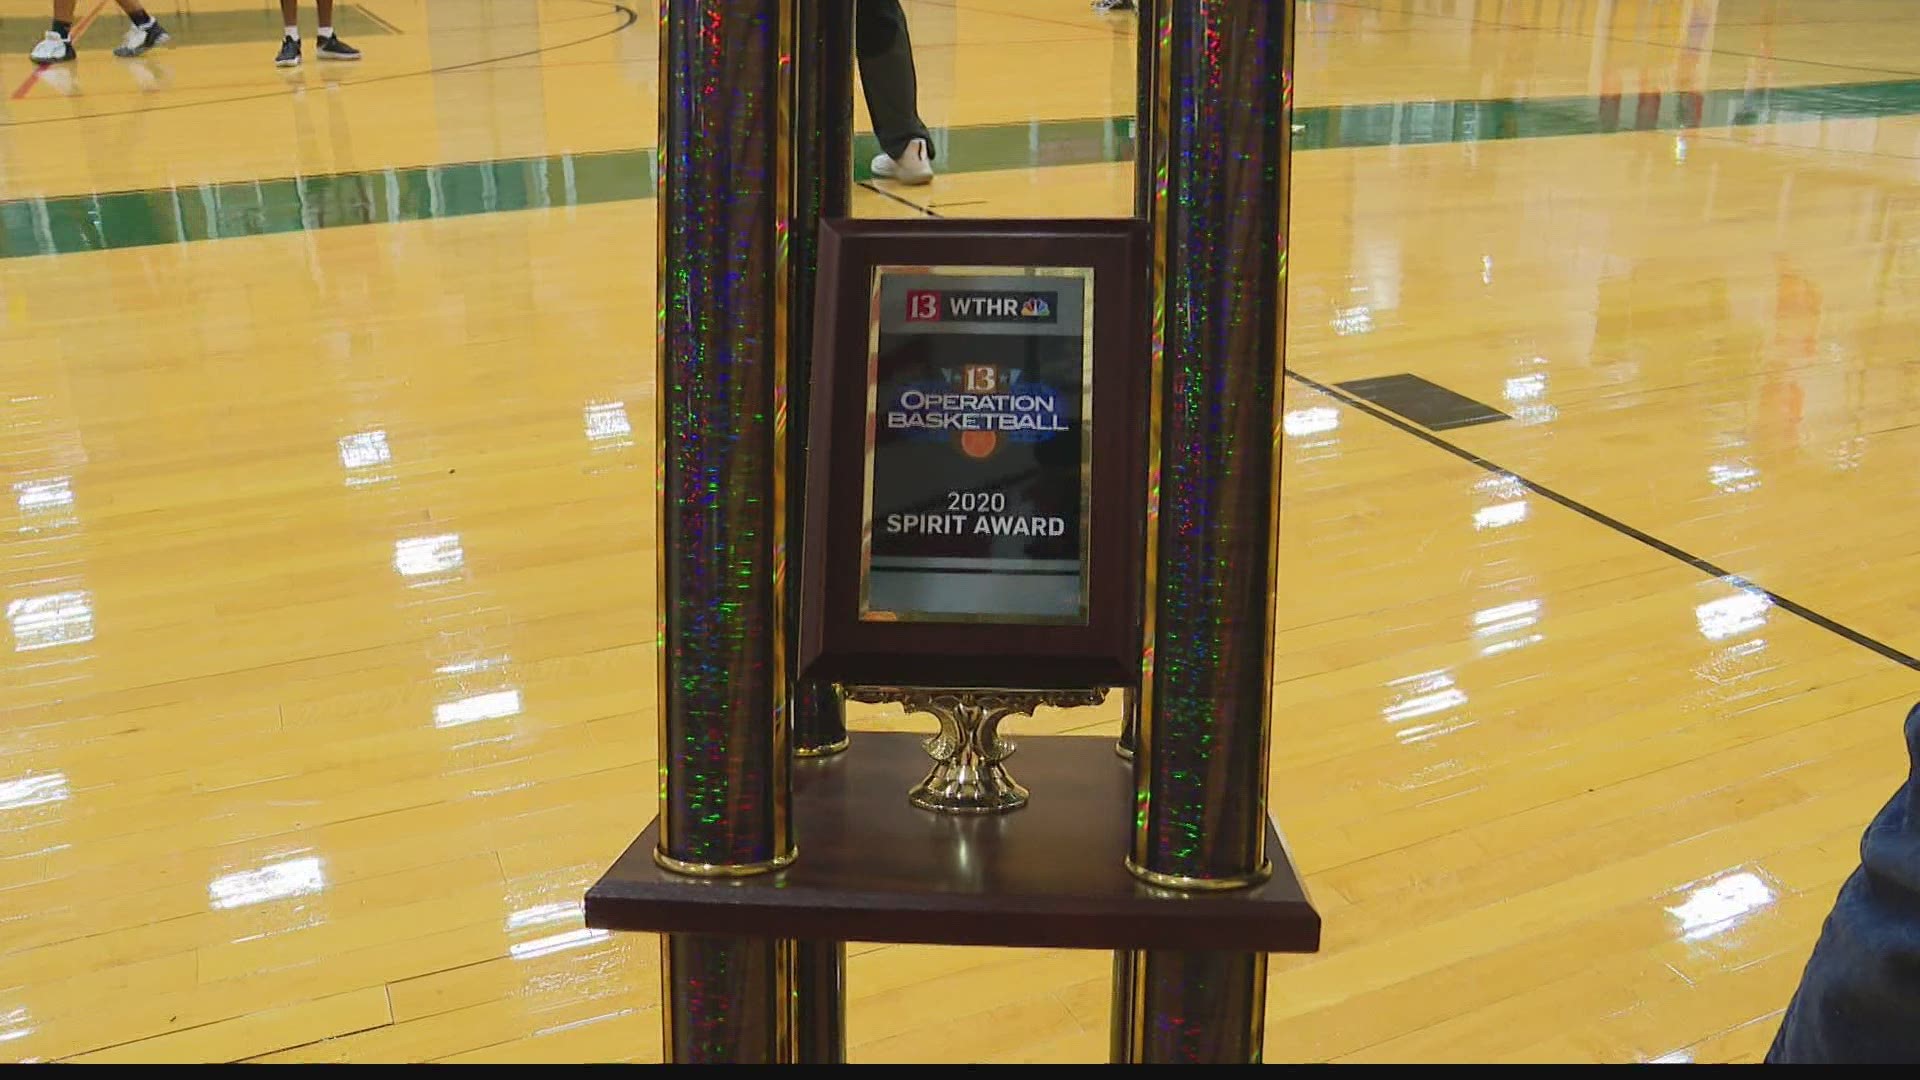 Dave Calabro is back with the Spirit Award for another season of Operation Basketball.